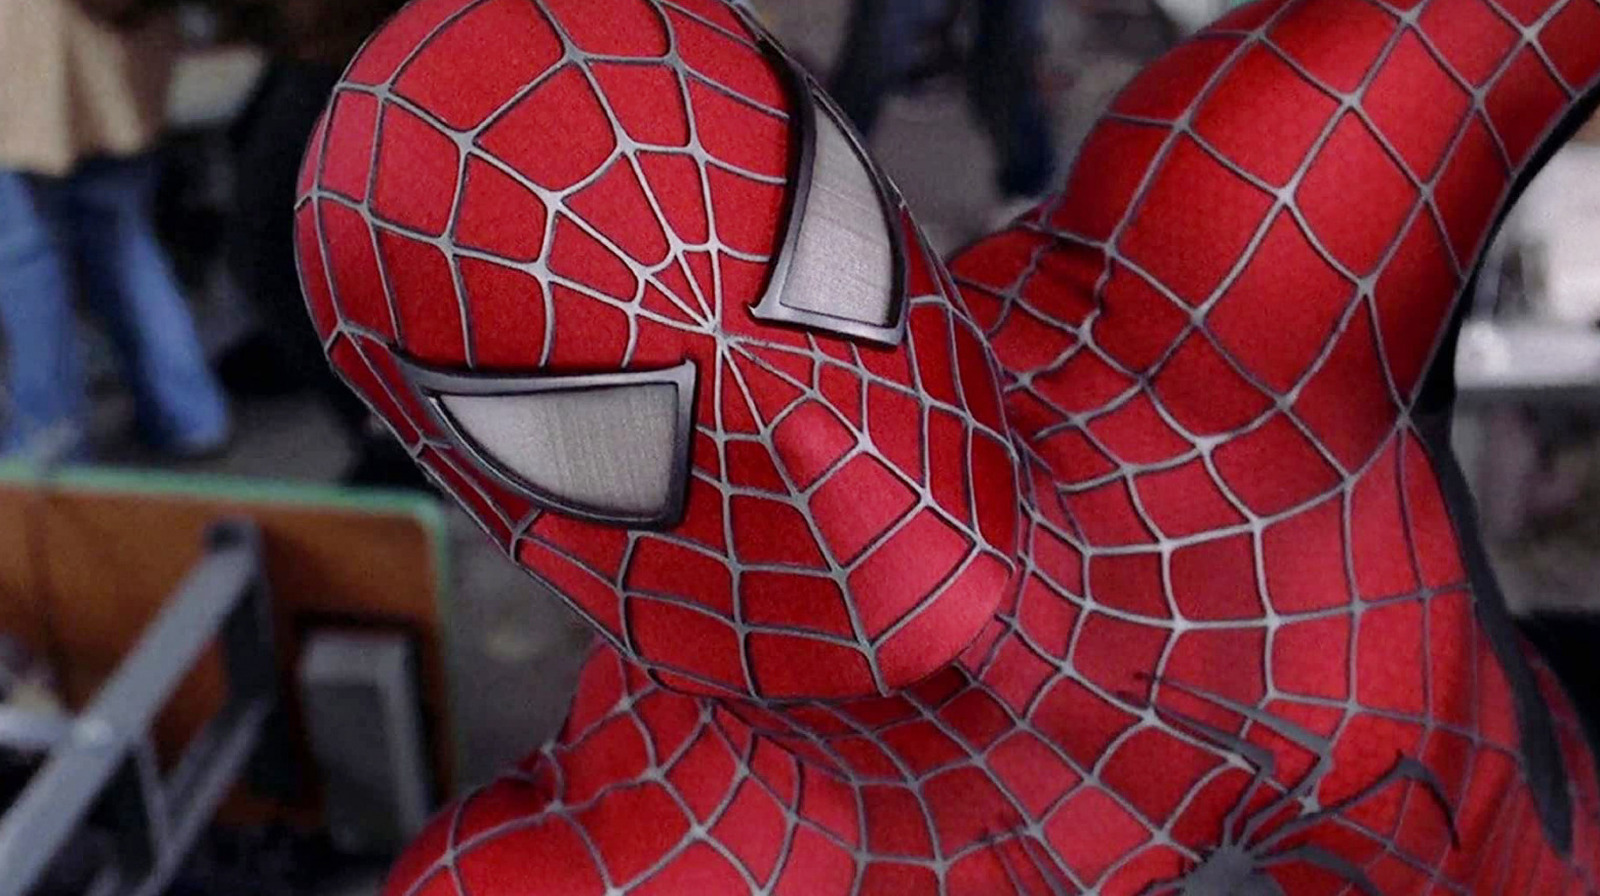 Spider-Man 2 face explained, Why did they recast Peter Parker actor?